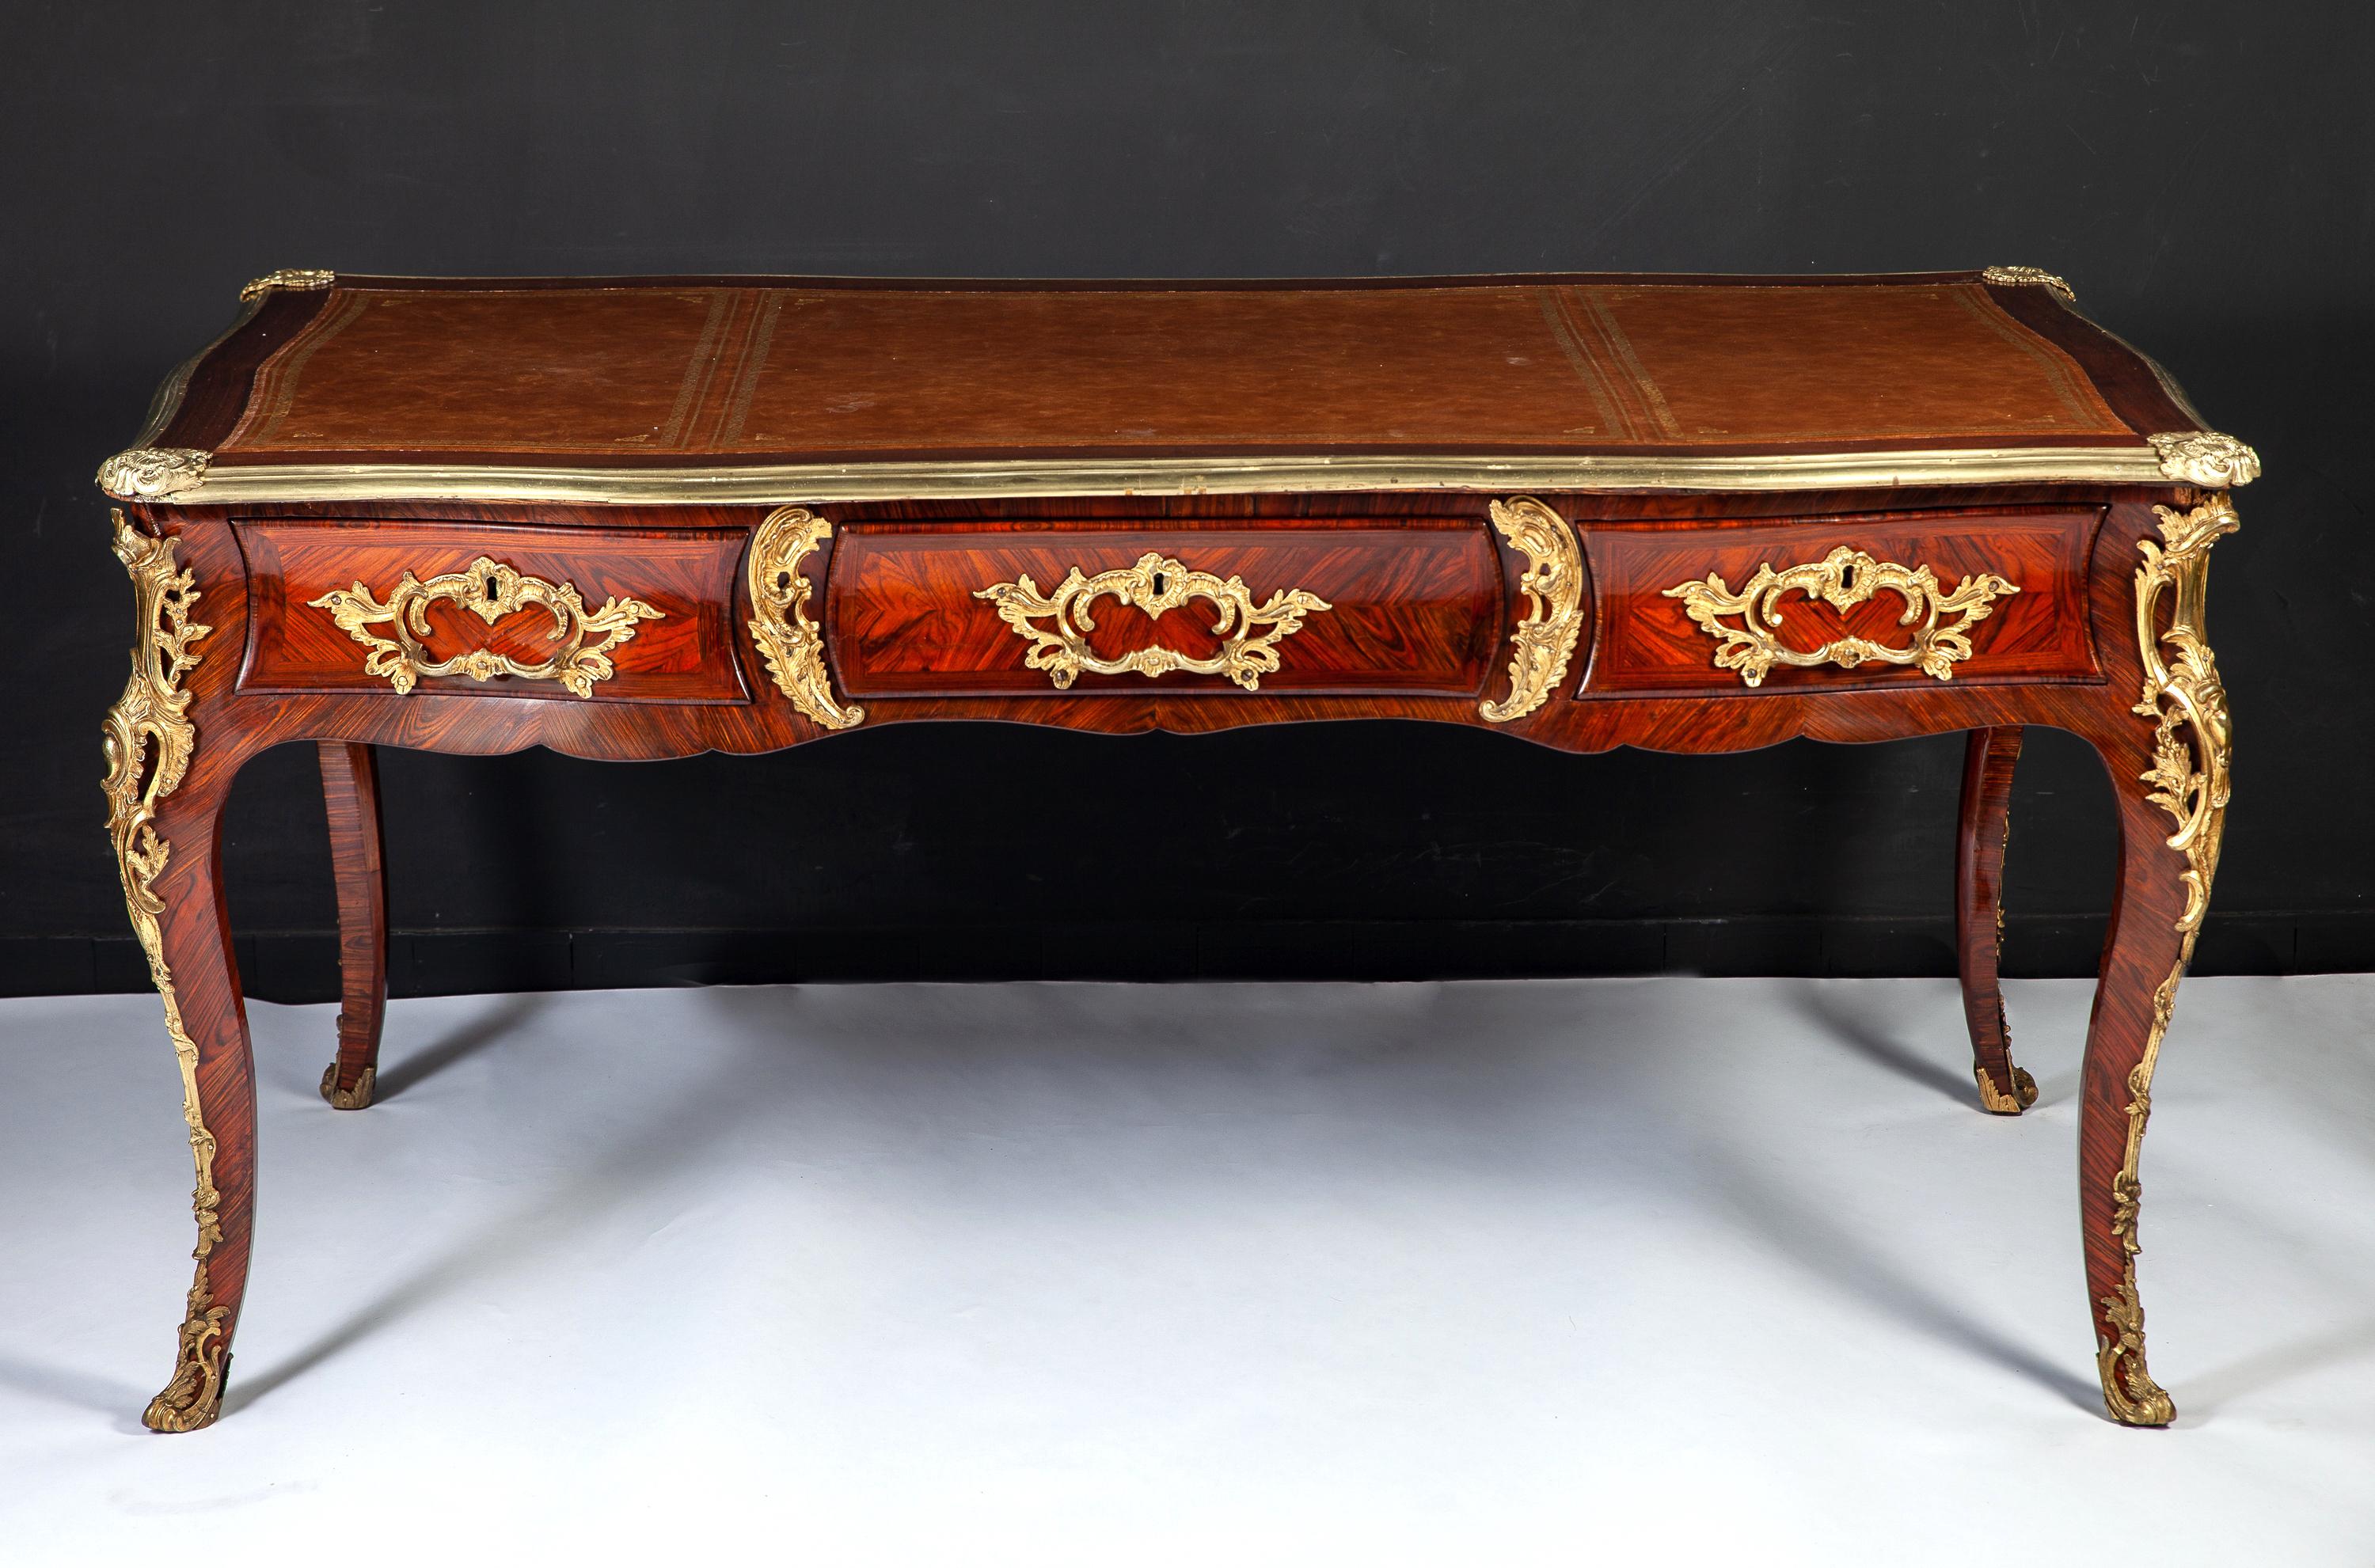 Superb quality French 18th century Louis XV, gilt bronze-mounted Kingwood bureau plat.
The shaped rectangular top inset with a tooled leather writing panel and fitted with three drawers to the undulating frieze, raised on cabriole legs.
Provenance